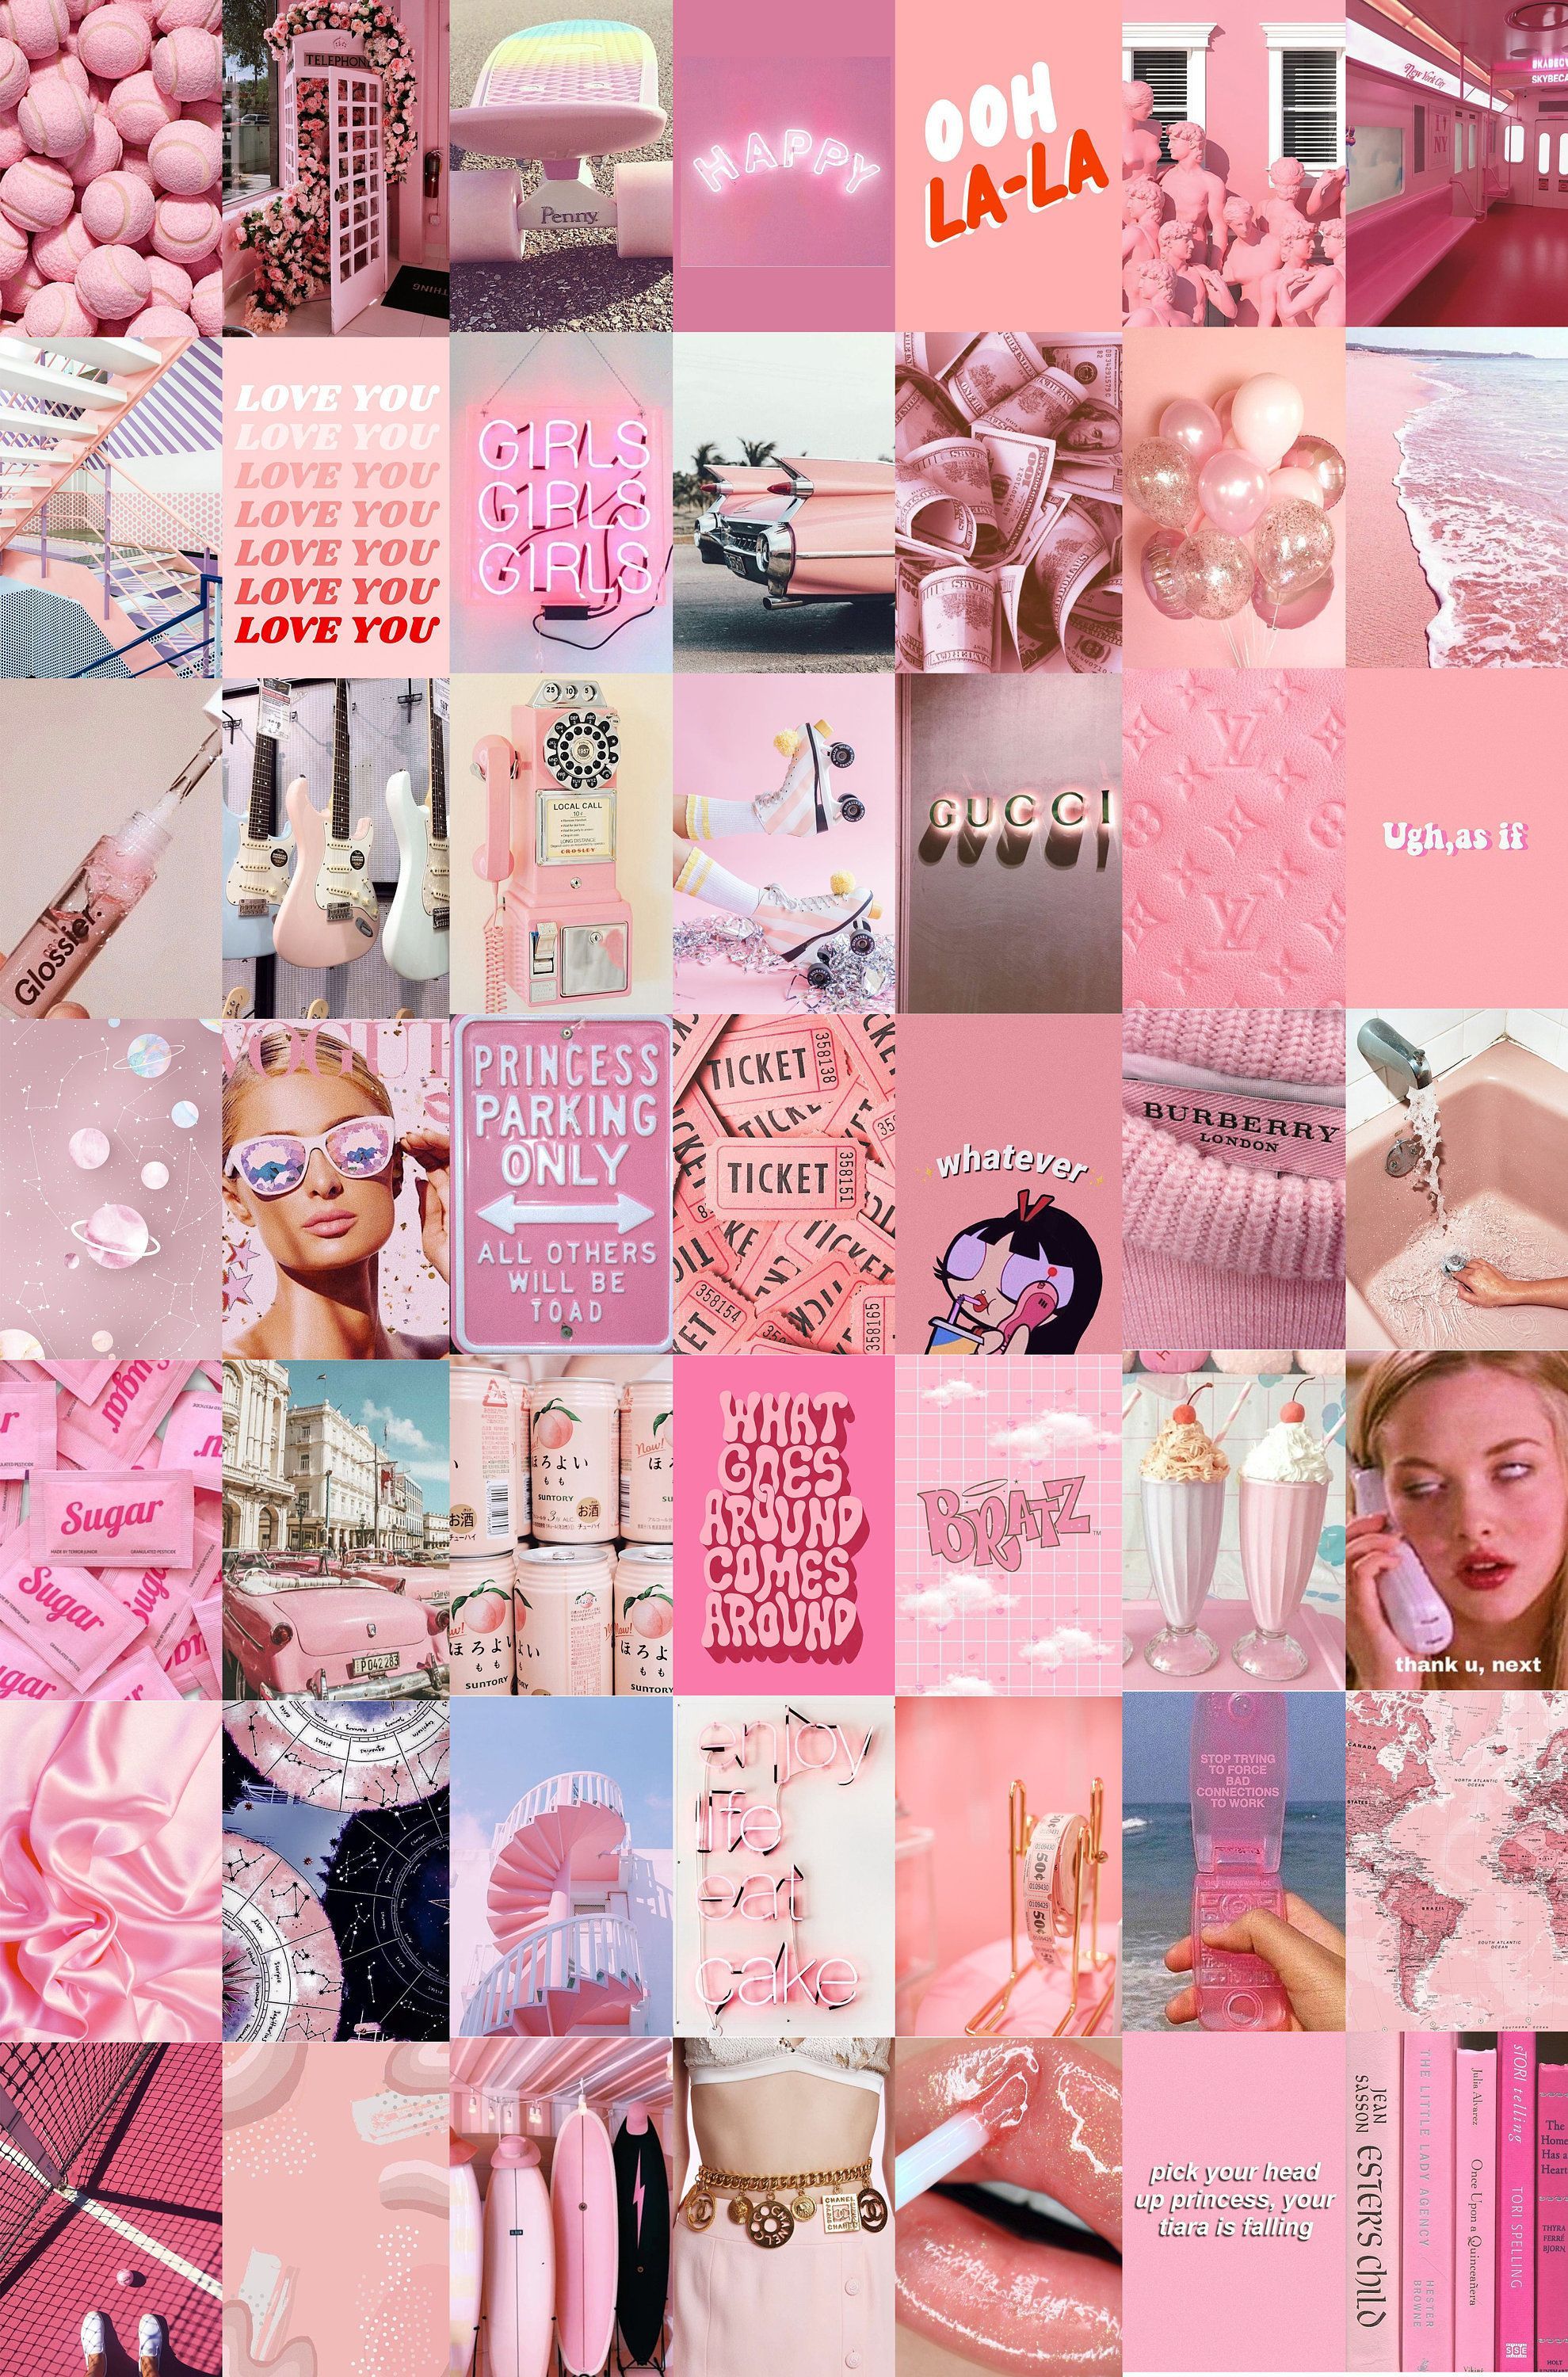 Aesthetic Wall Collage Kit Boujee Wall Collage Dorm Room. Etsy. Pink wallpaper girly, Pink walls, Wall collage decor